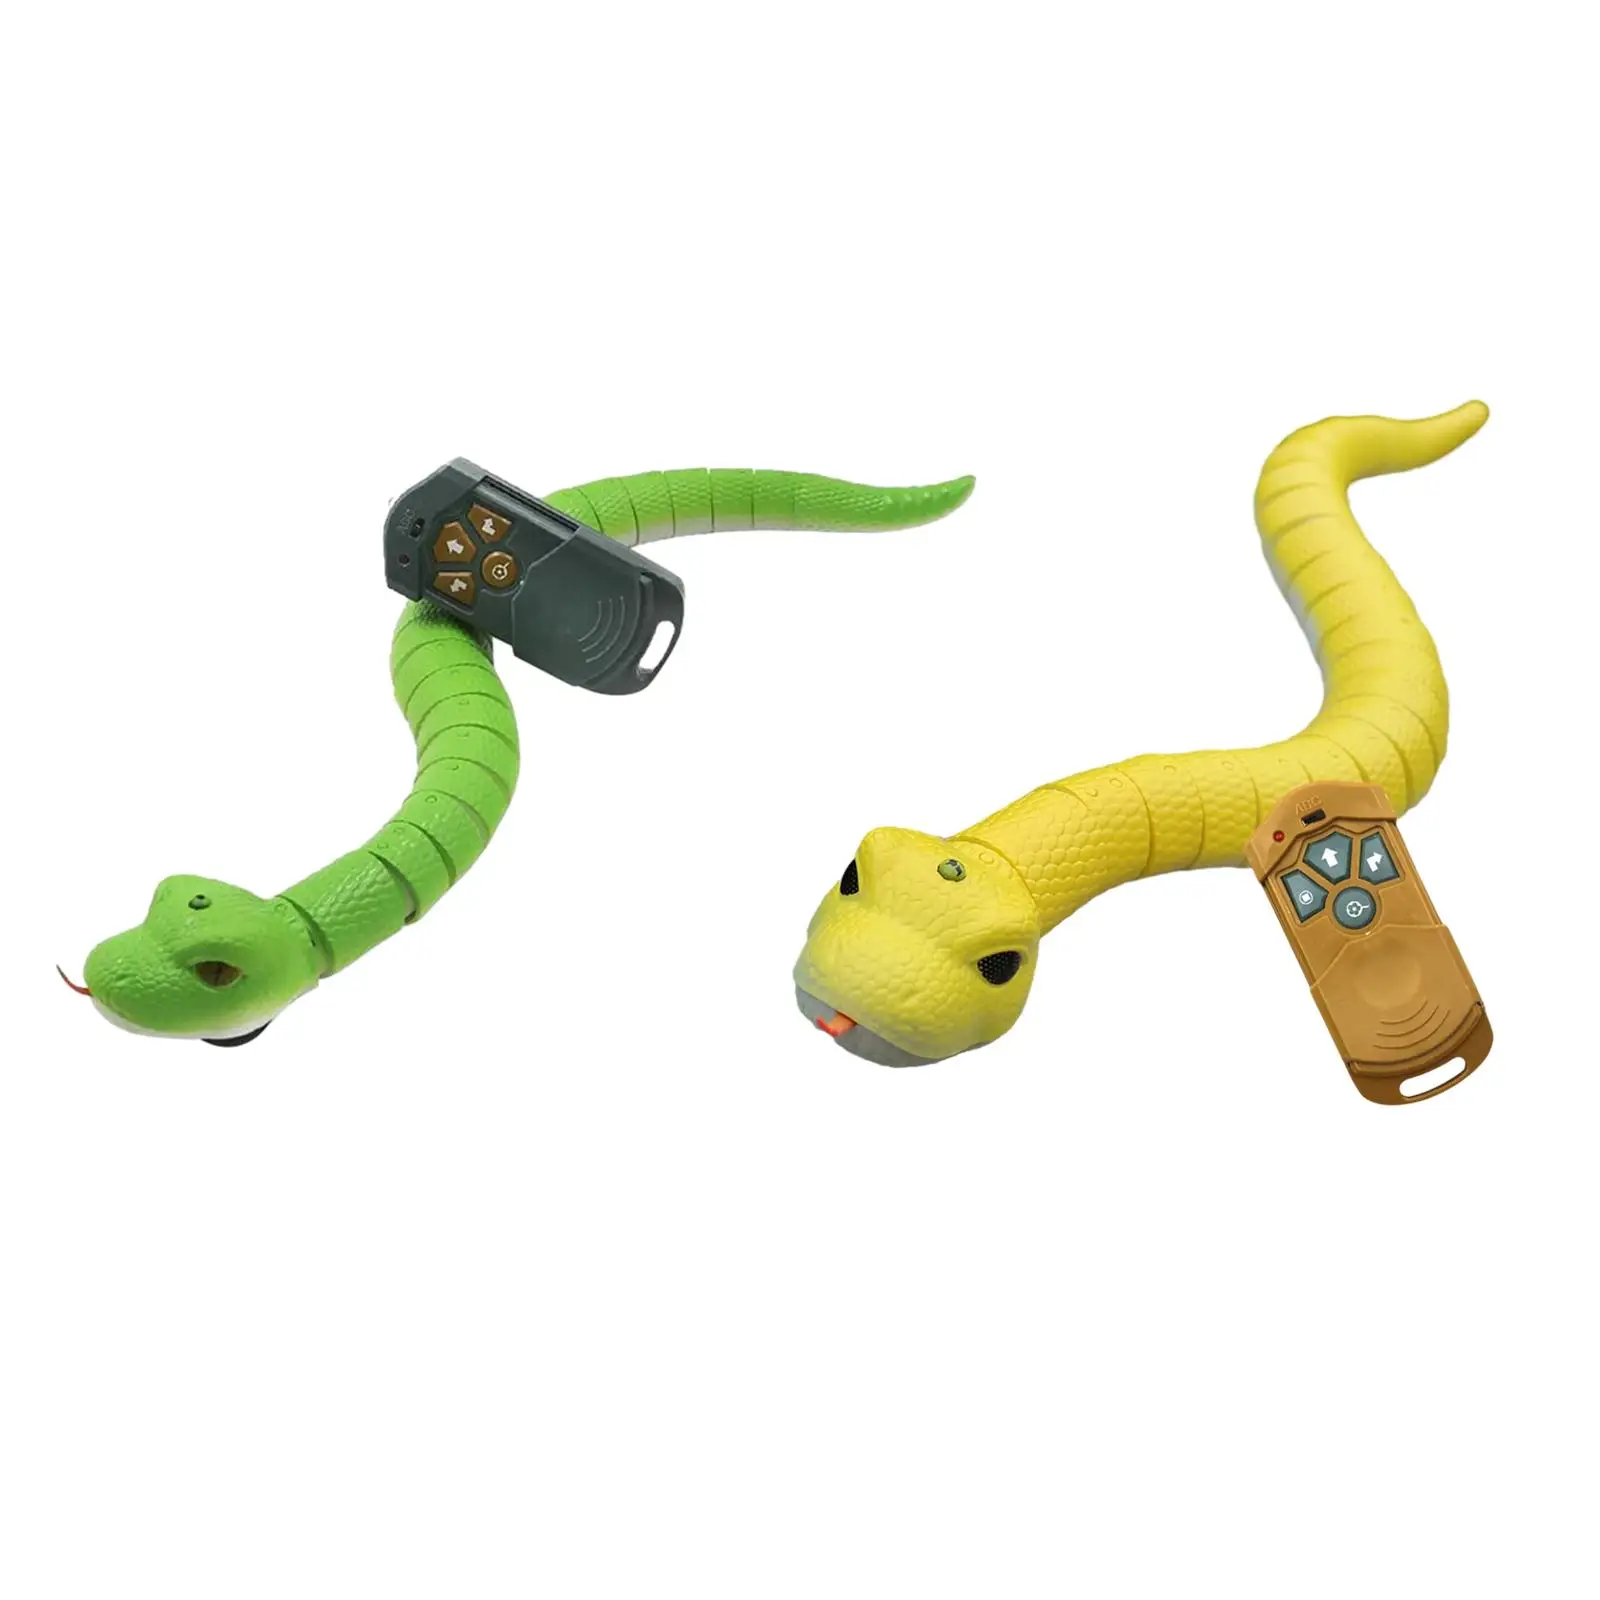 Remote Control Snake Toy Realistic Snake Crawling Animal for Boys Gift Halloween April Fools` Day Stage Props Interactive Toys